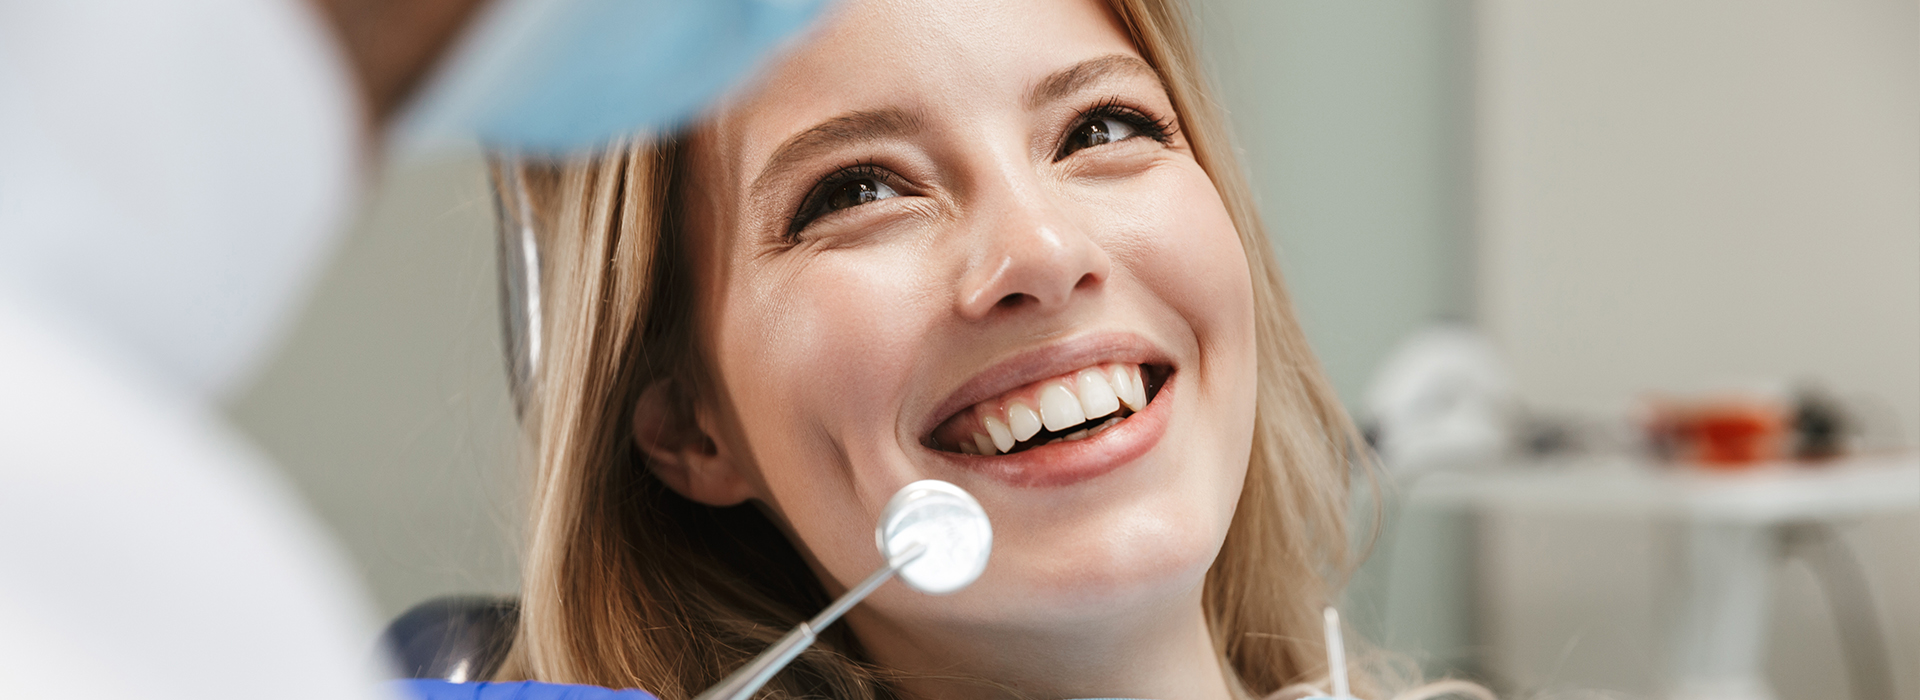 Kennedy Dentistry | Ceramic Crowns, Sports Mouthguards and TMJ Disorders